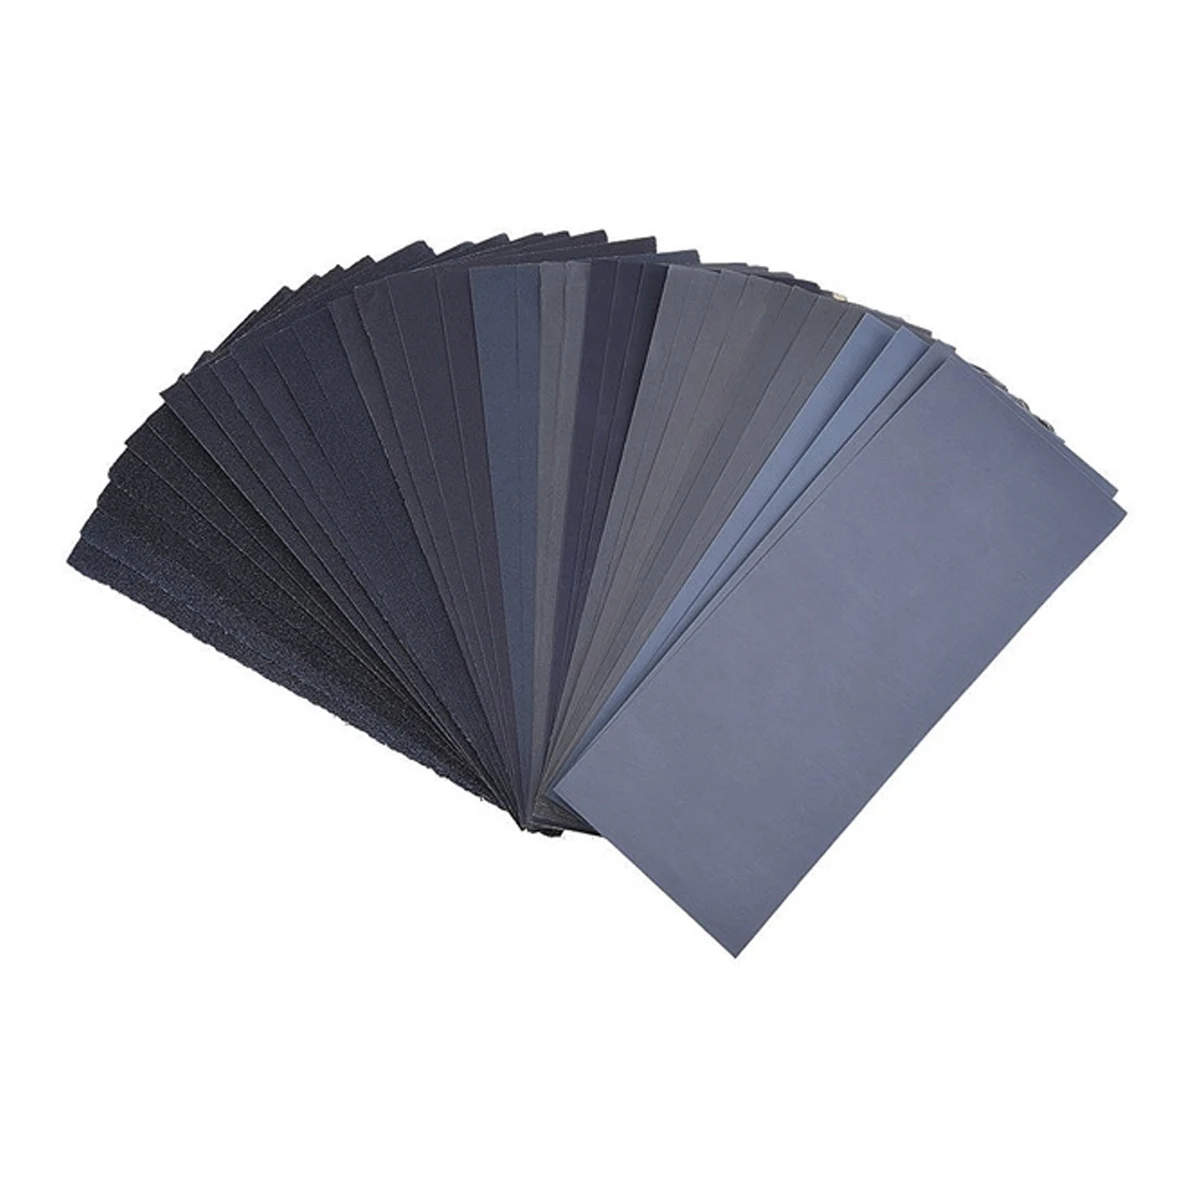 800 grit Sandpaper Wet or Dry Sheets Ship from US 9 x 3.6 inch 